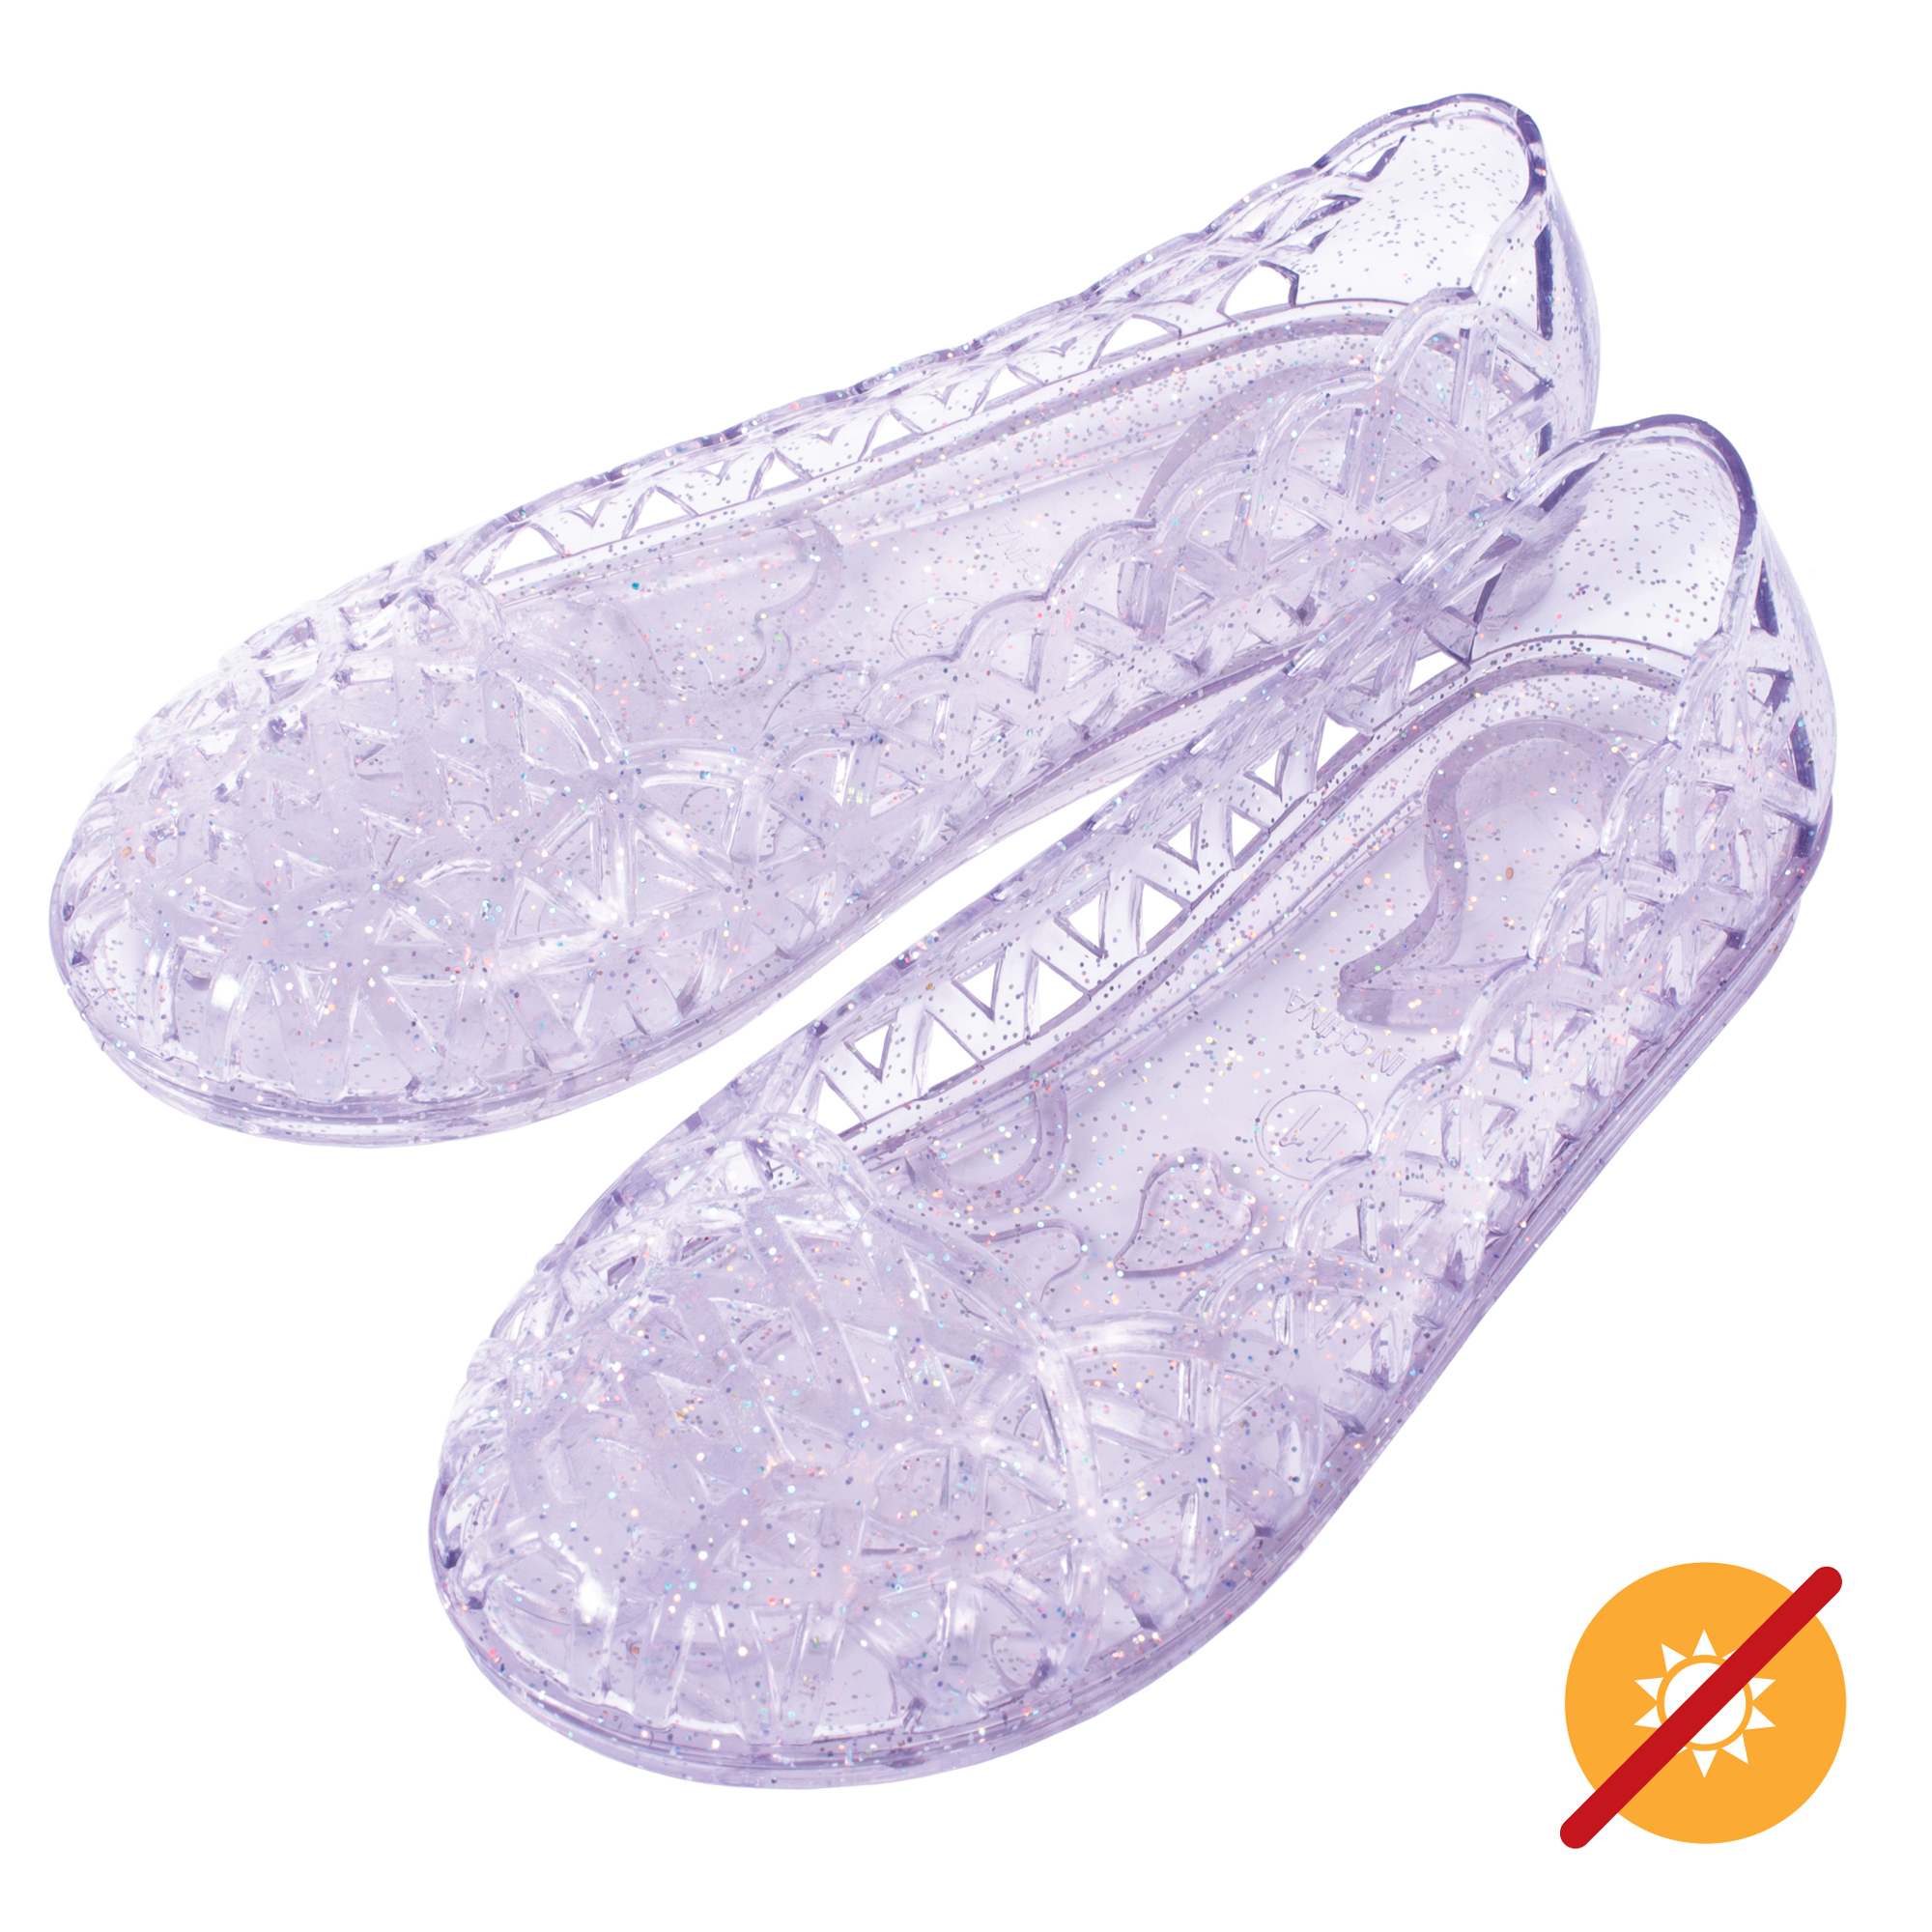 Heart Sole Girl Jellies Shoes - 6 Purple by DelSol for Kids - 1 Pair Shoes - image 3 of 6